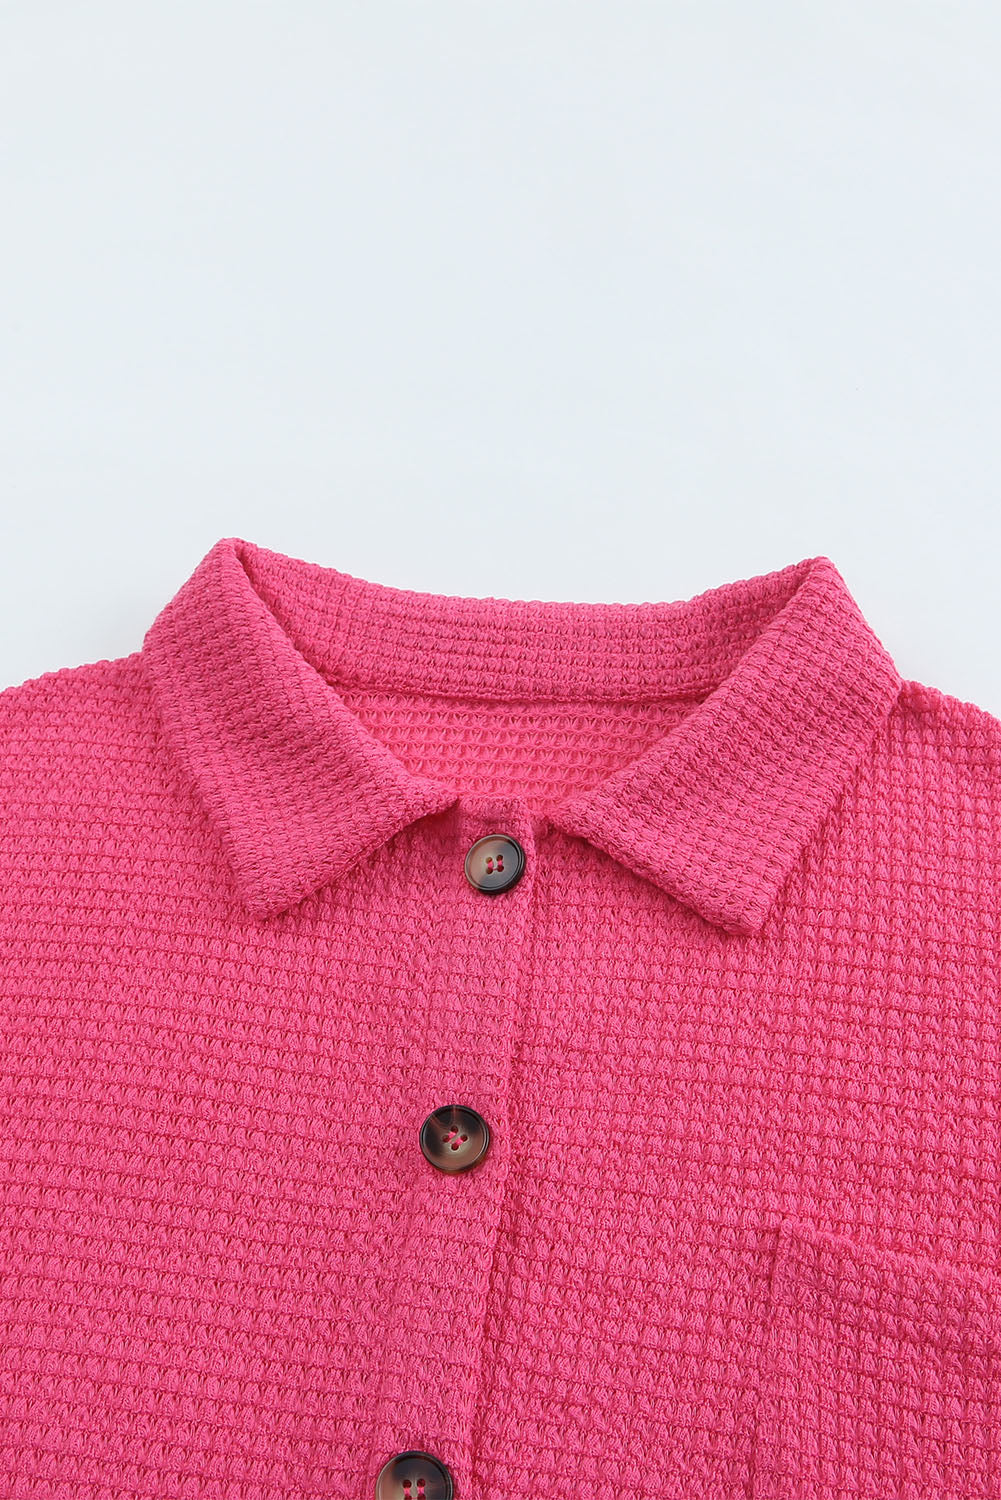 Brown Waffle Knit Button Up Casual Shirt